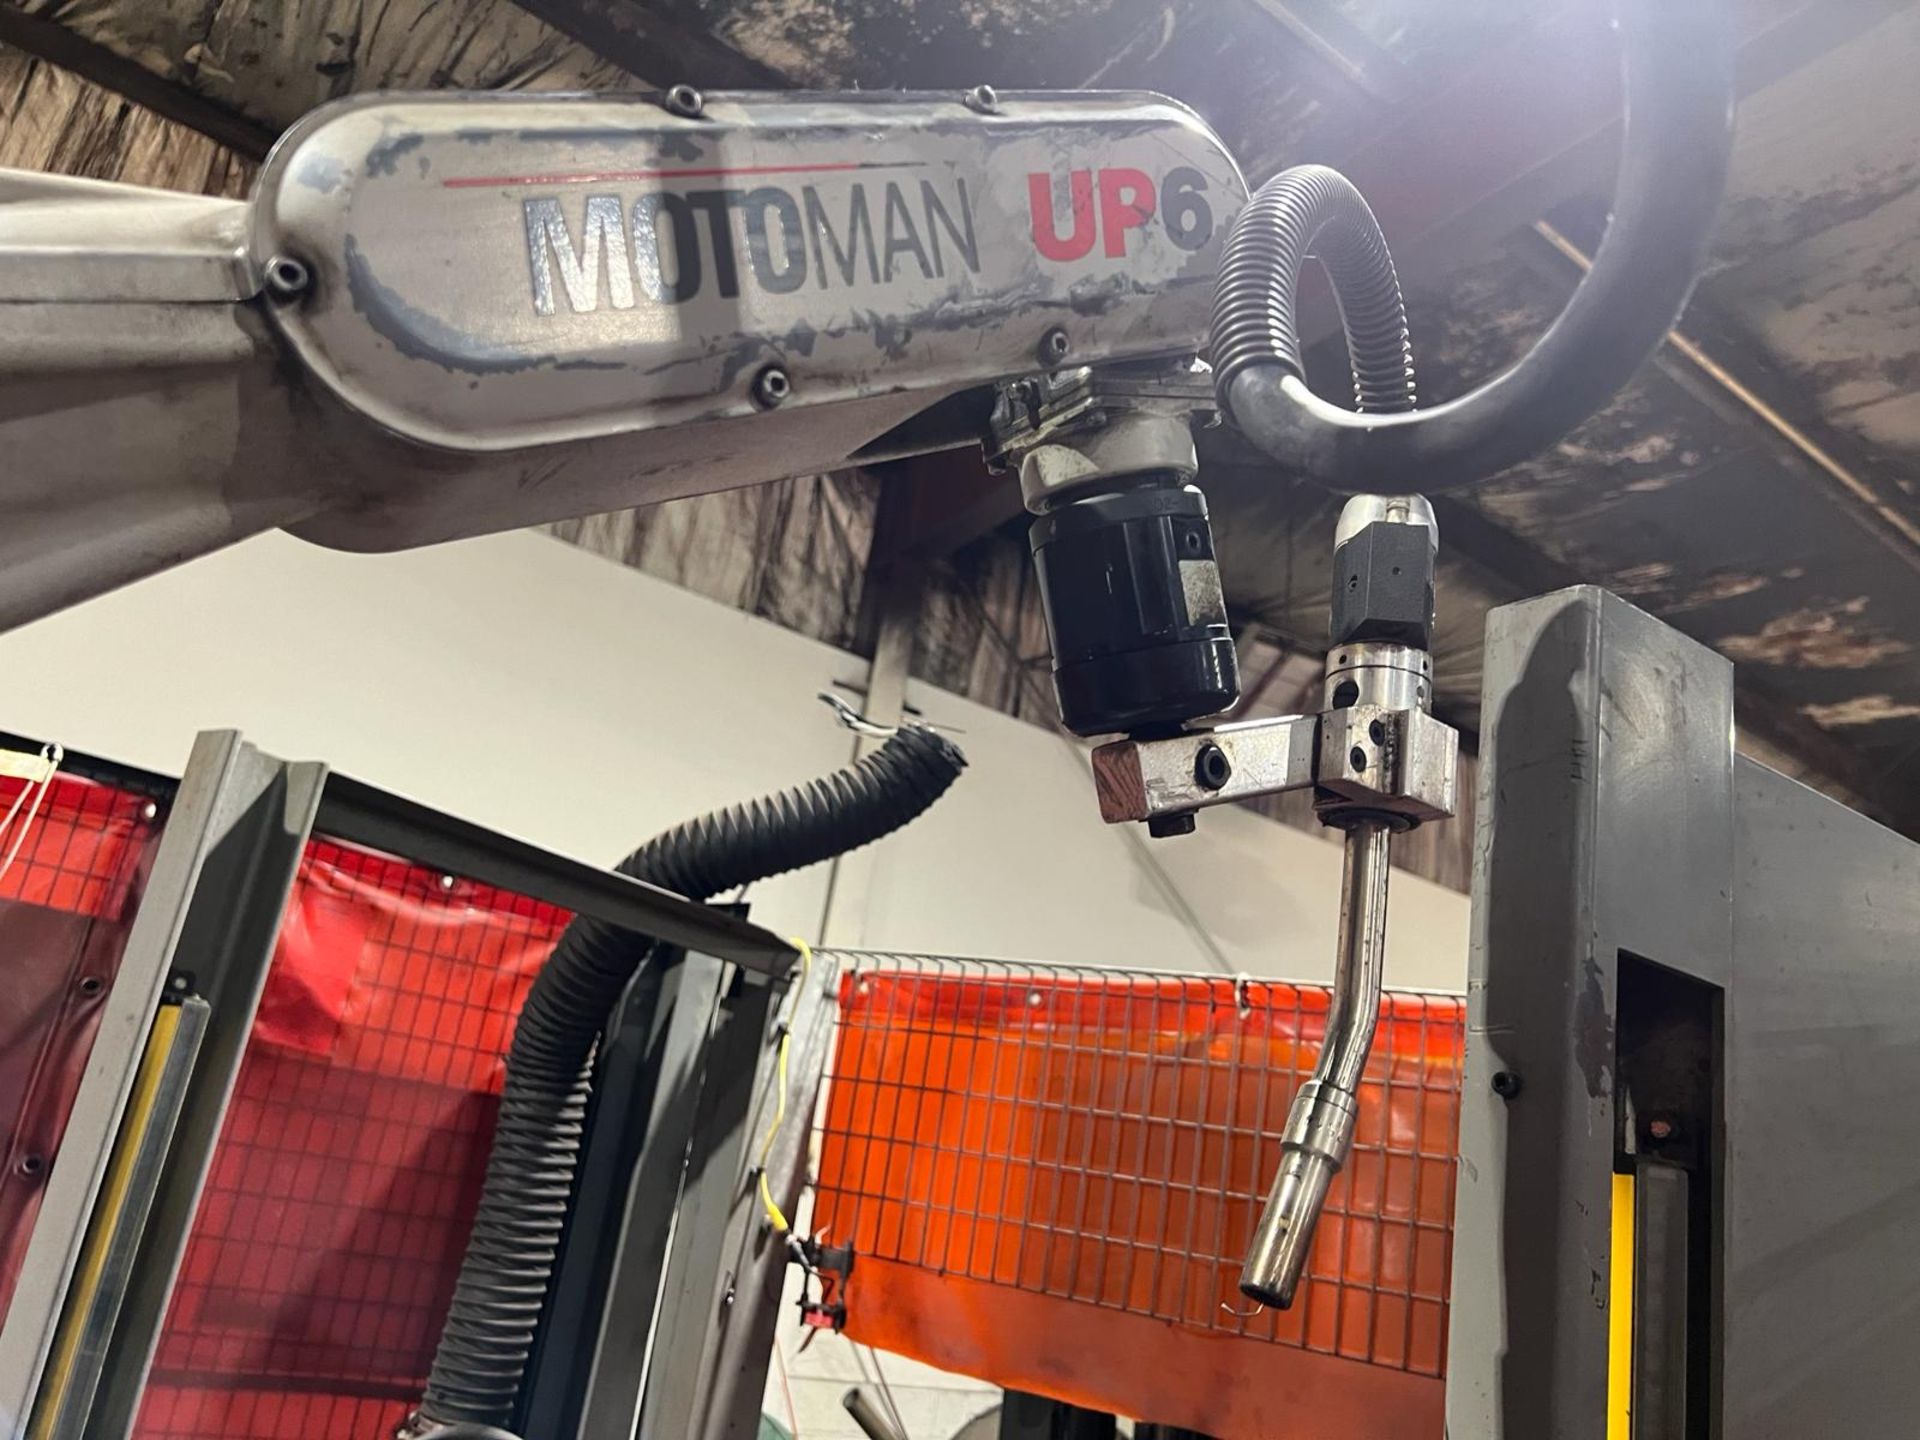 Motoman Model UP-6 Welding Robot Cell with Yasnac Controller, Miller Axcess 450 Welder Tip Cleaner - Image 24 of 26